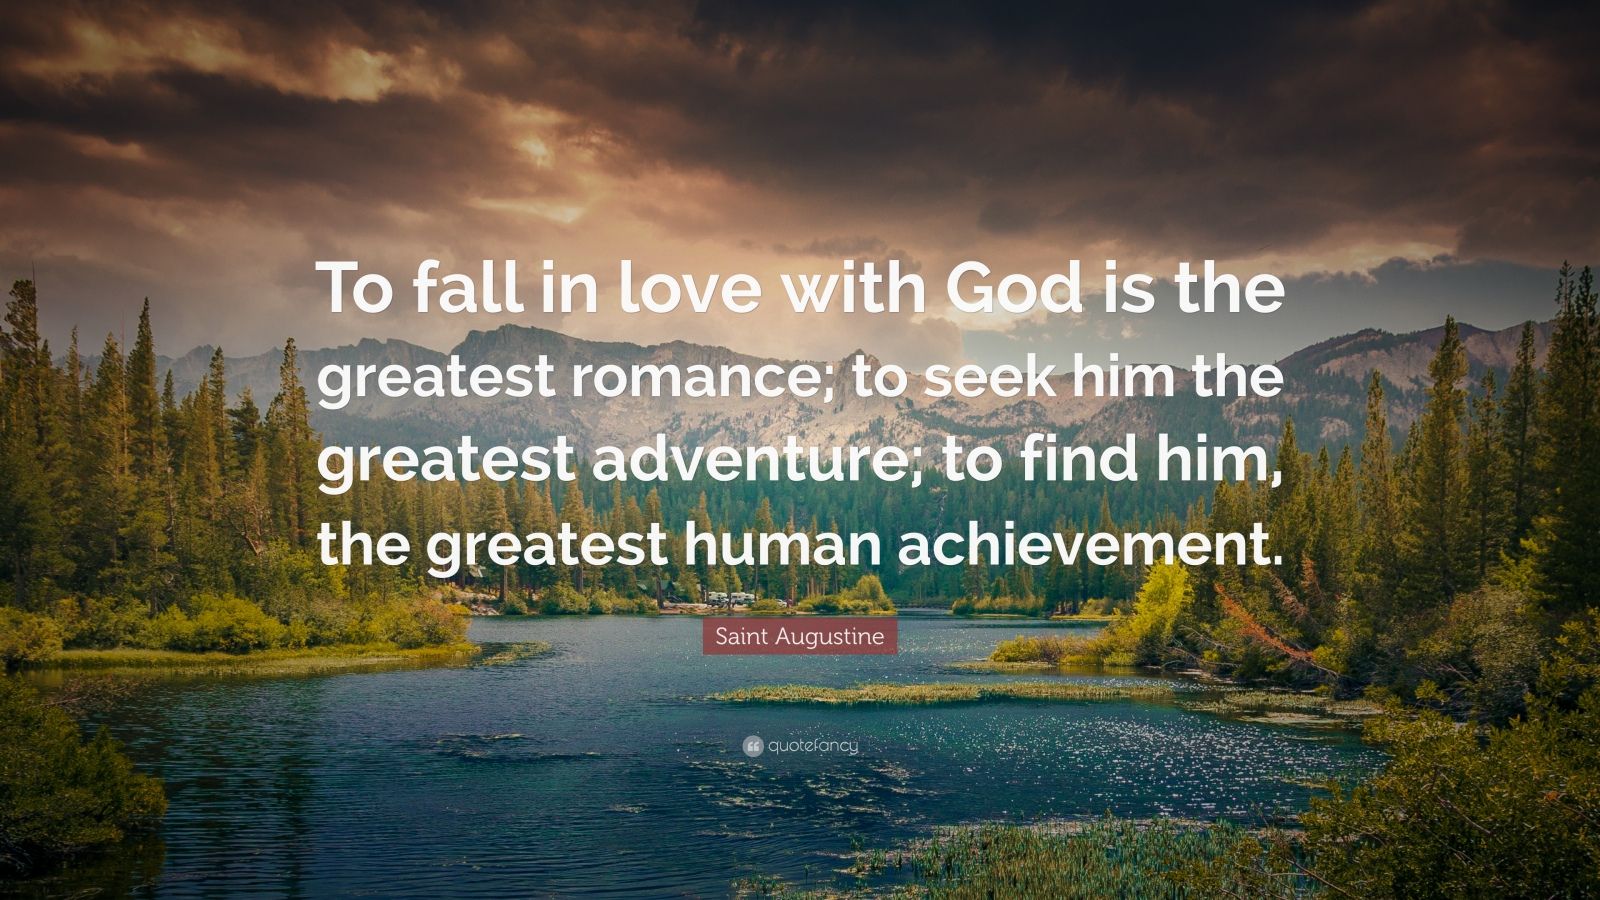 113411 Saint Augustine Quote To fall in love with God is the greatest